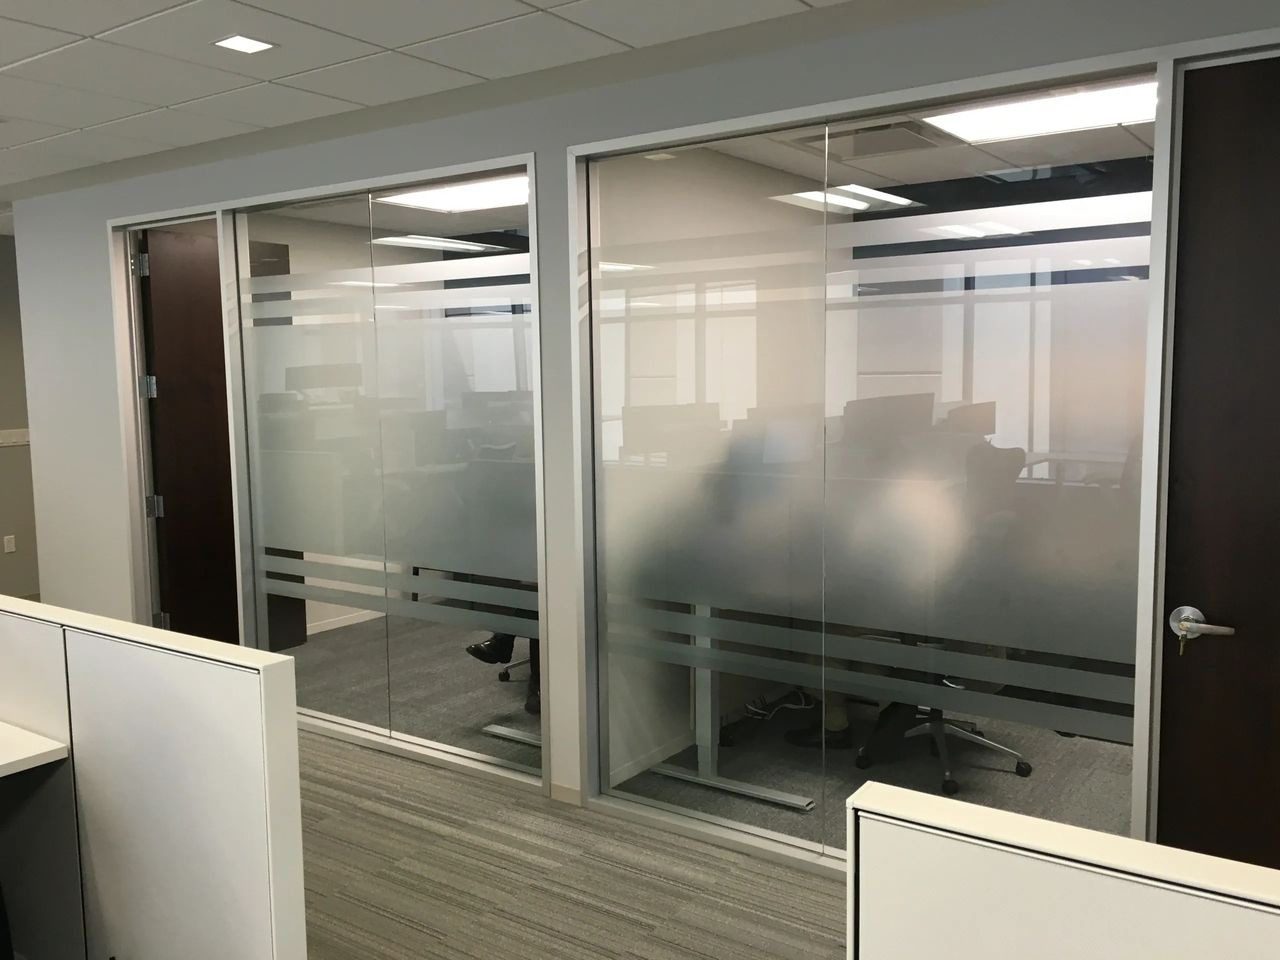 A view of two windows in an office.